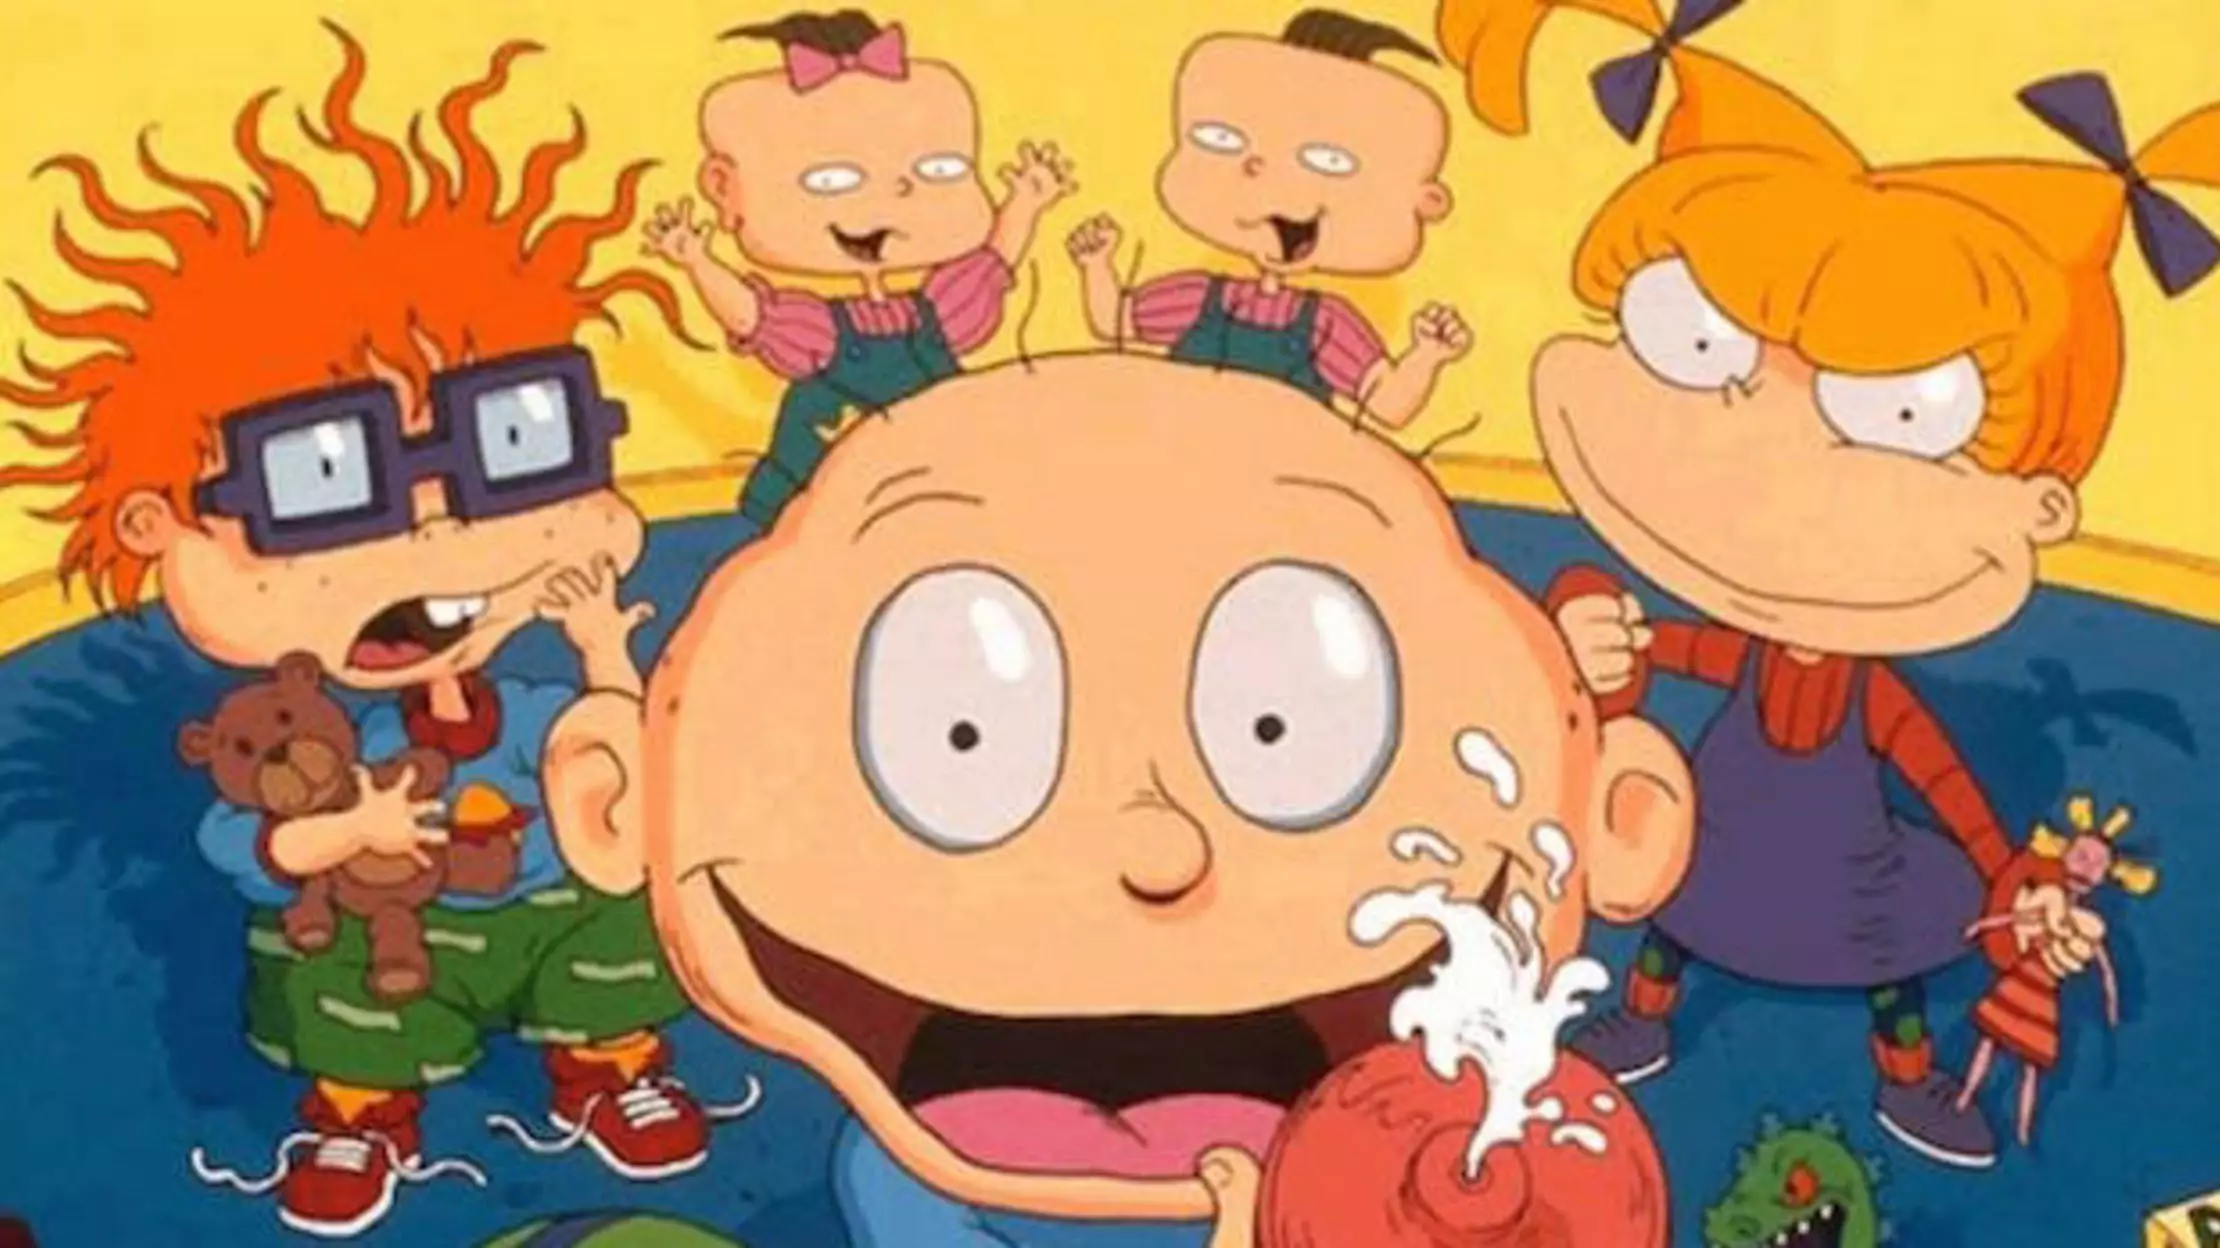 Rugrats followed the adventures of a group of babies (